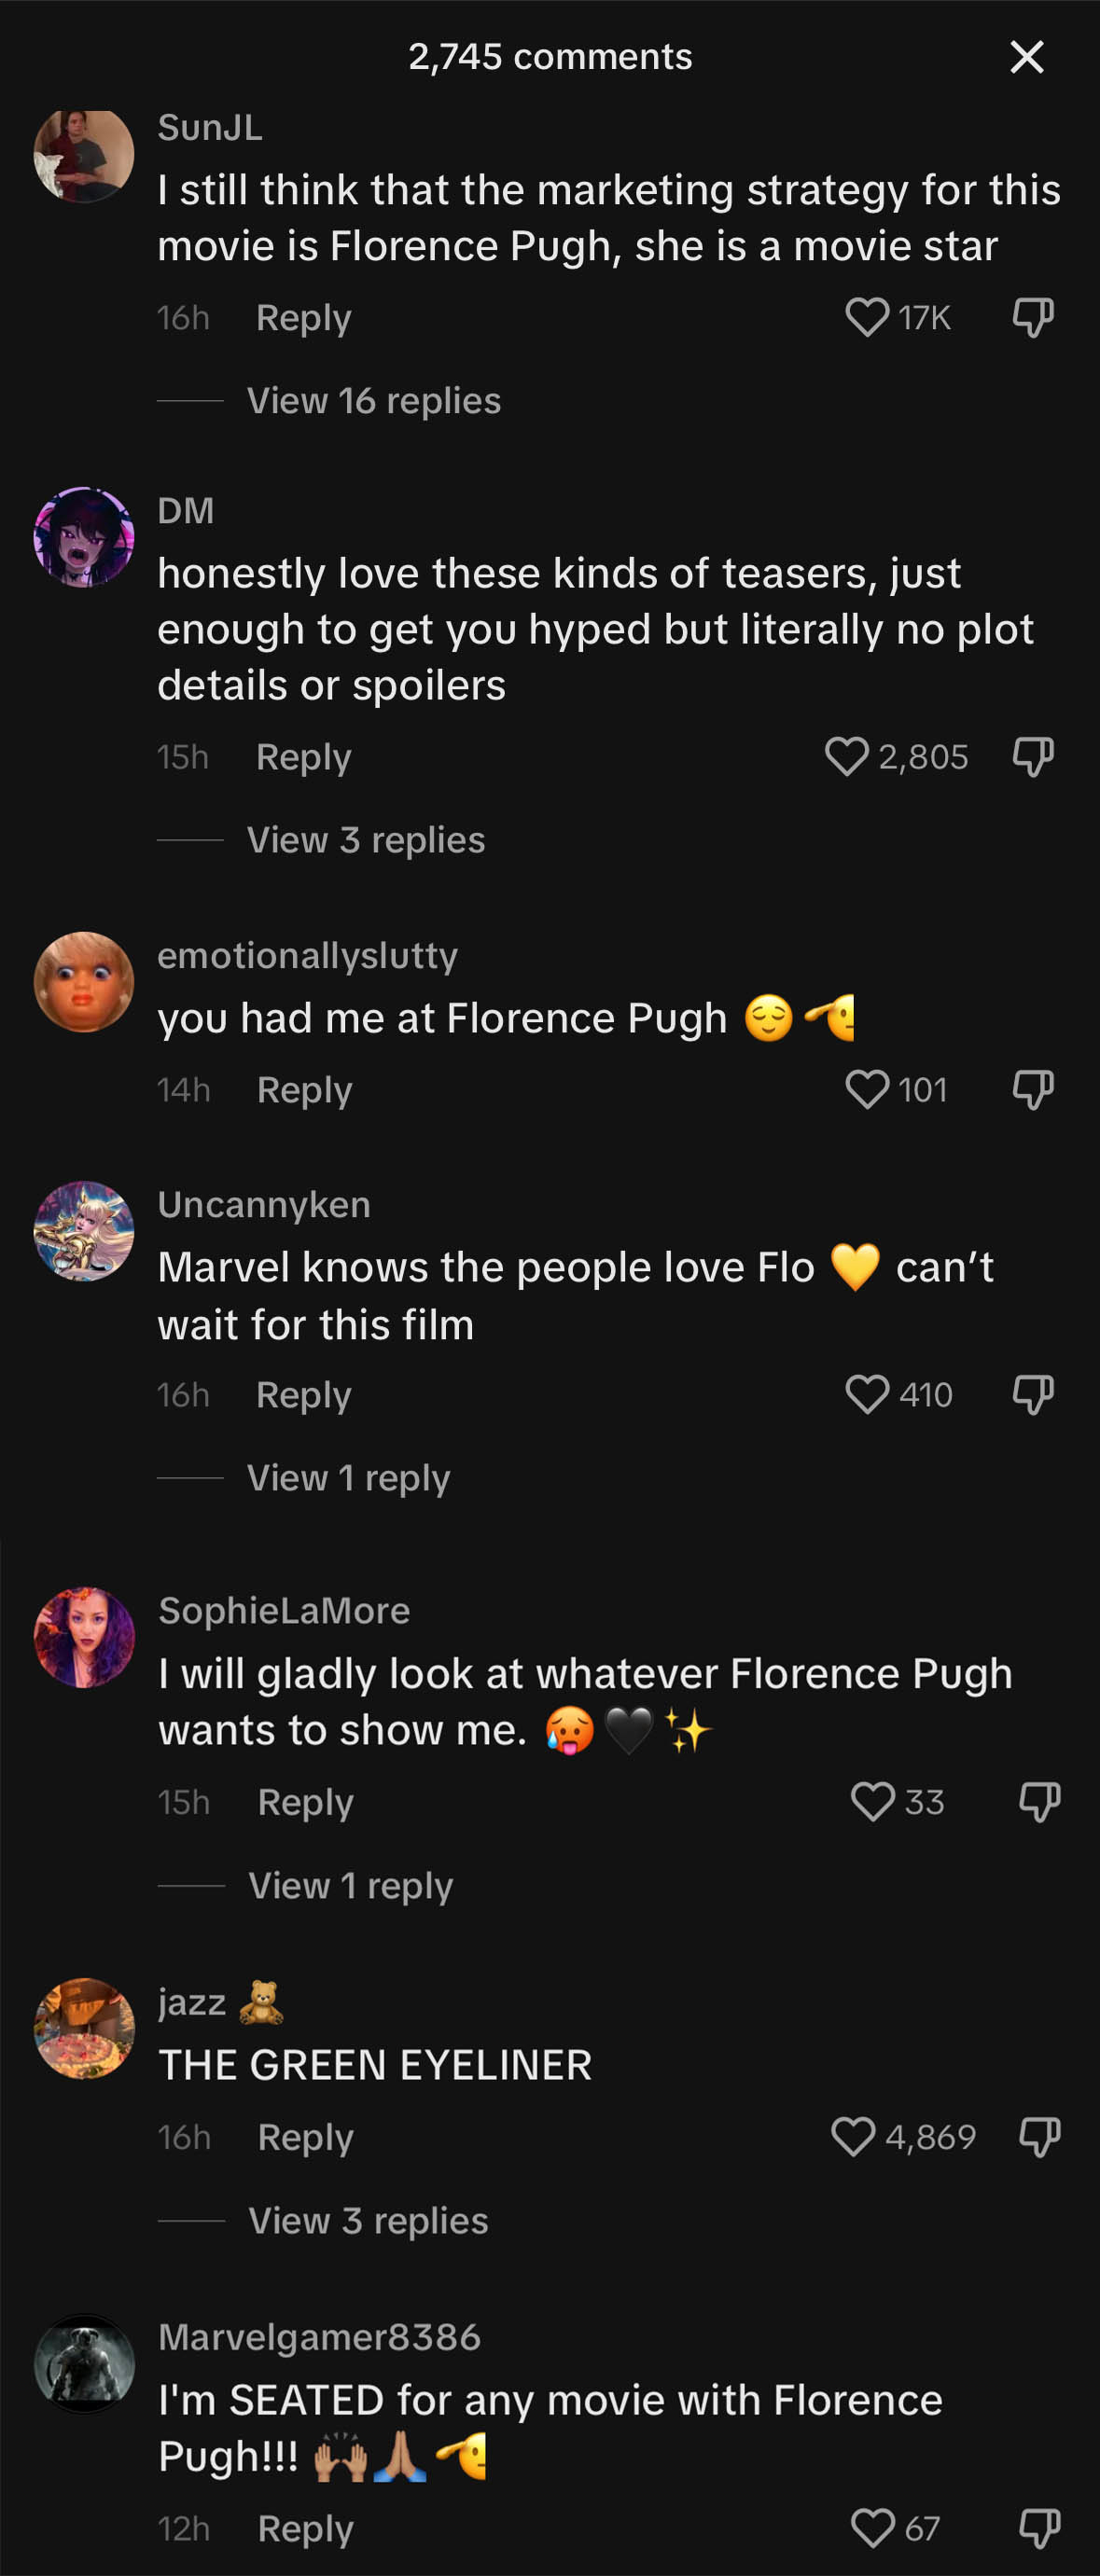 TikTok comments featuring a mix of comments from fans anticipating the performance of Florence Pugh in Thunderbolts, including &quot;I will gladly look at anything Florence Pugh wants to show me&quot;